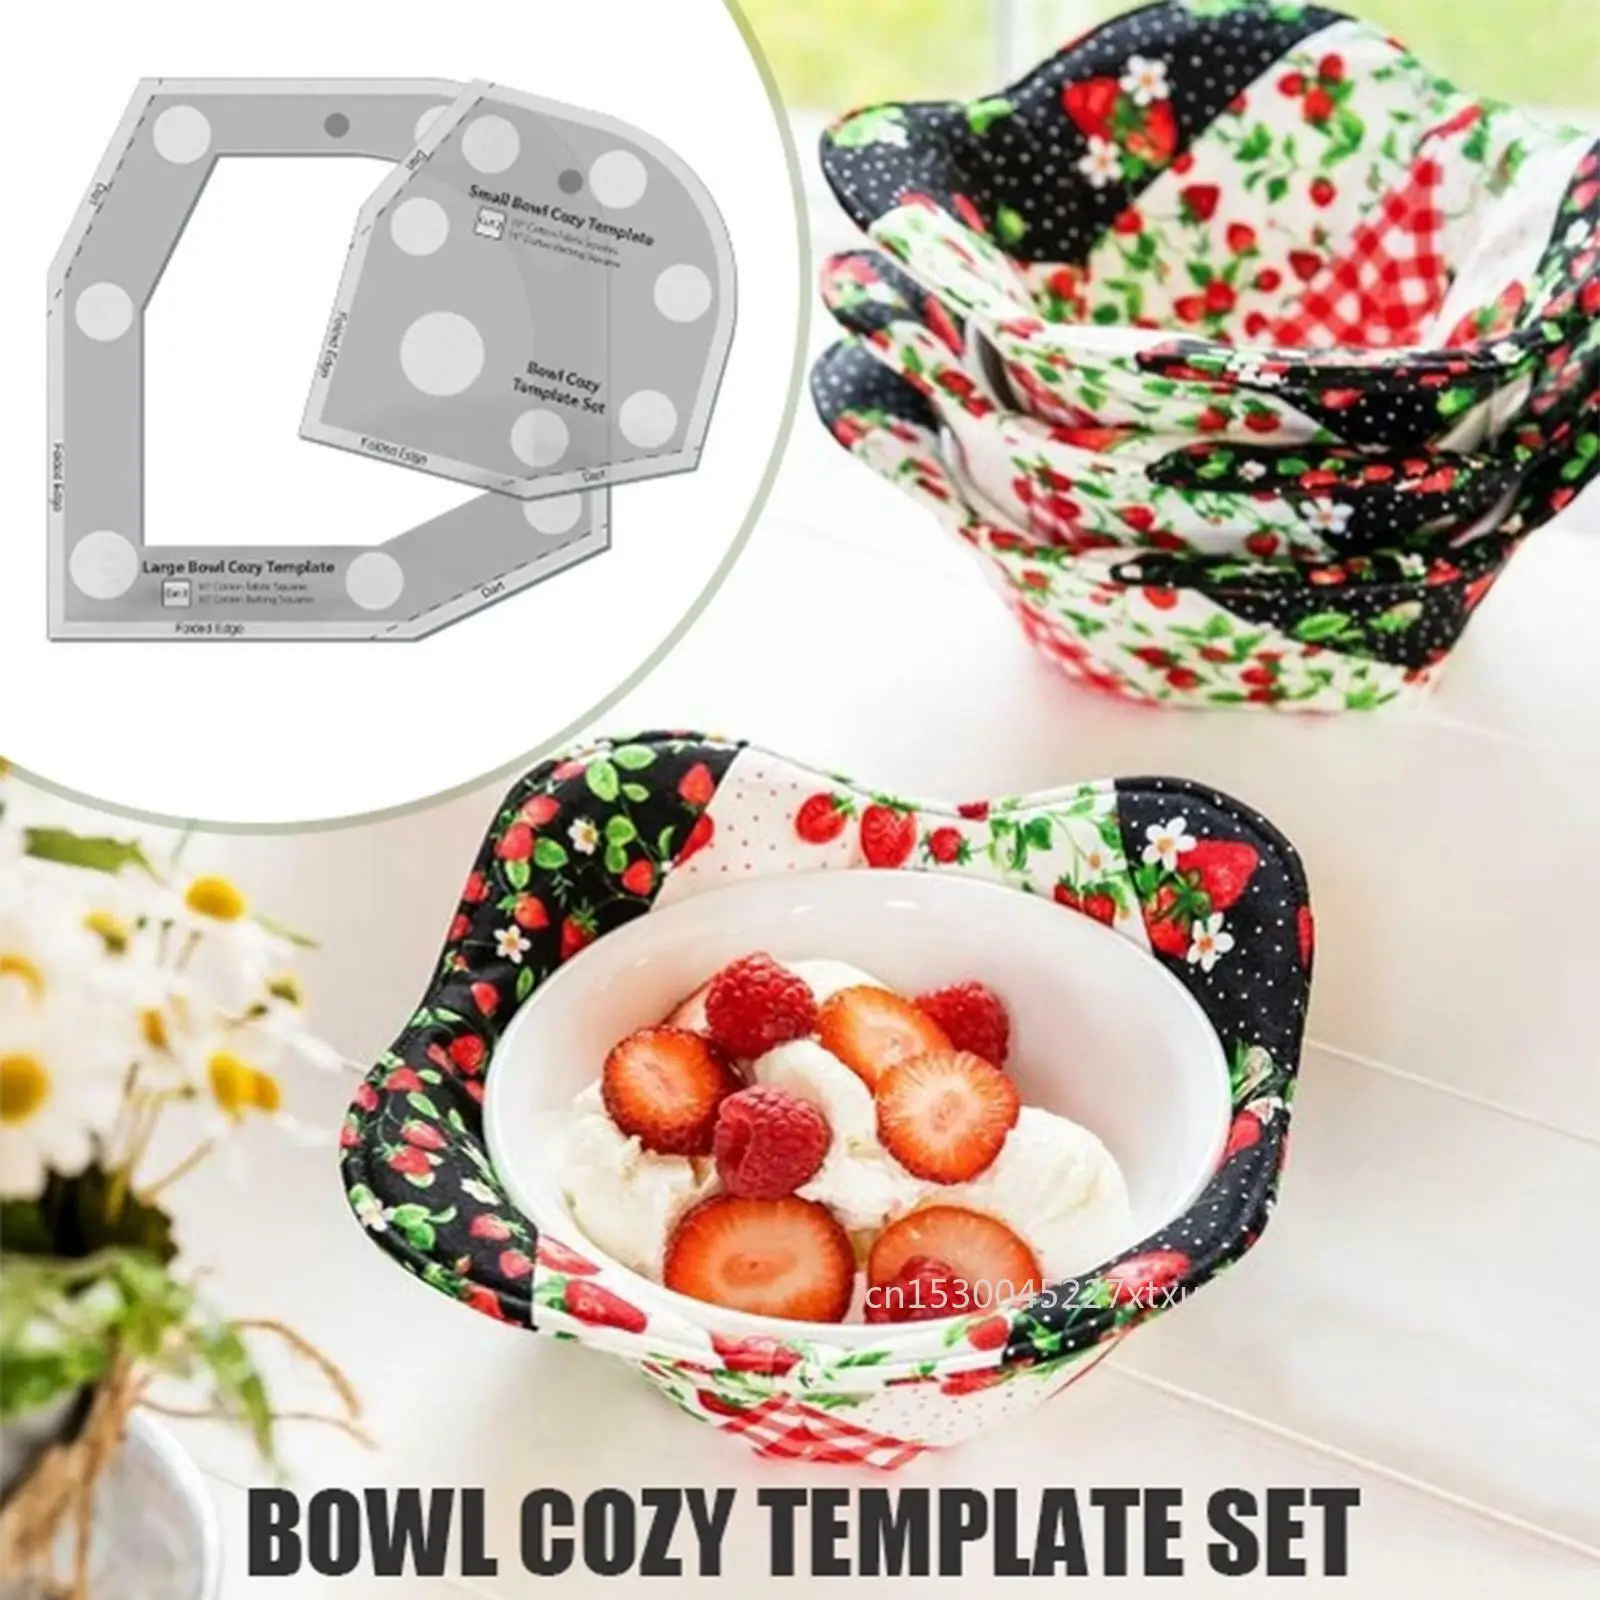 5 inch AMLESO Bowl Cozy Template Acrylic DIY Craft Patchwork Ruler Bowl Wrap for Sewing Quilting Template Sewing Pattern 